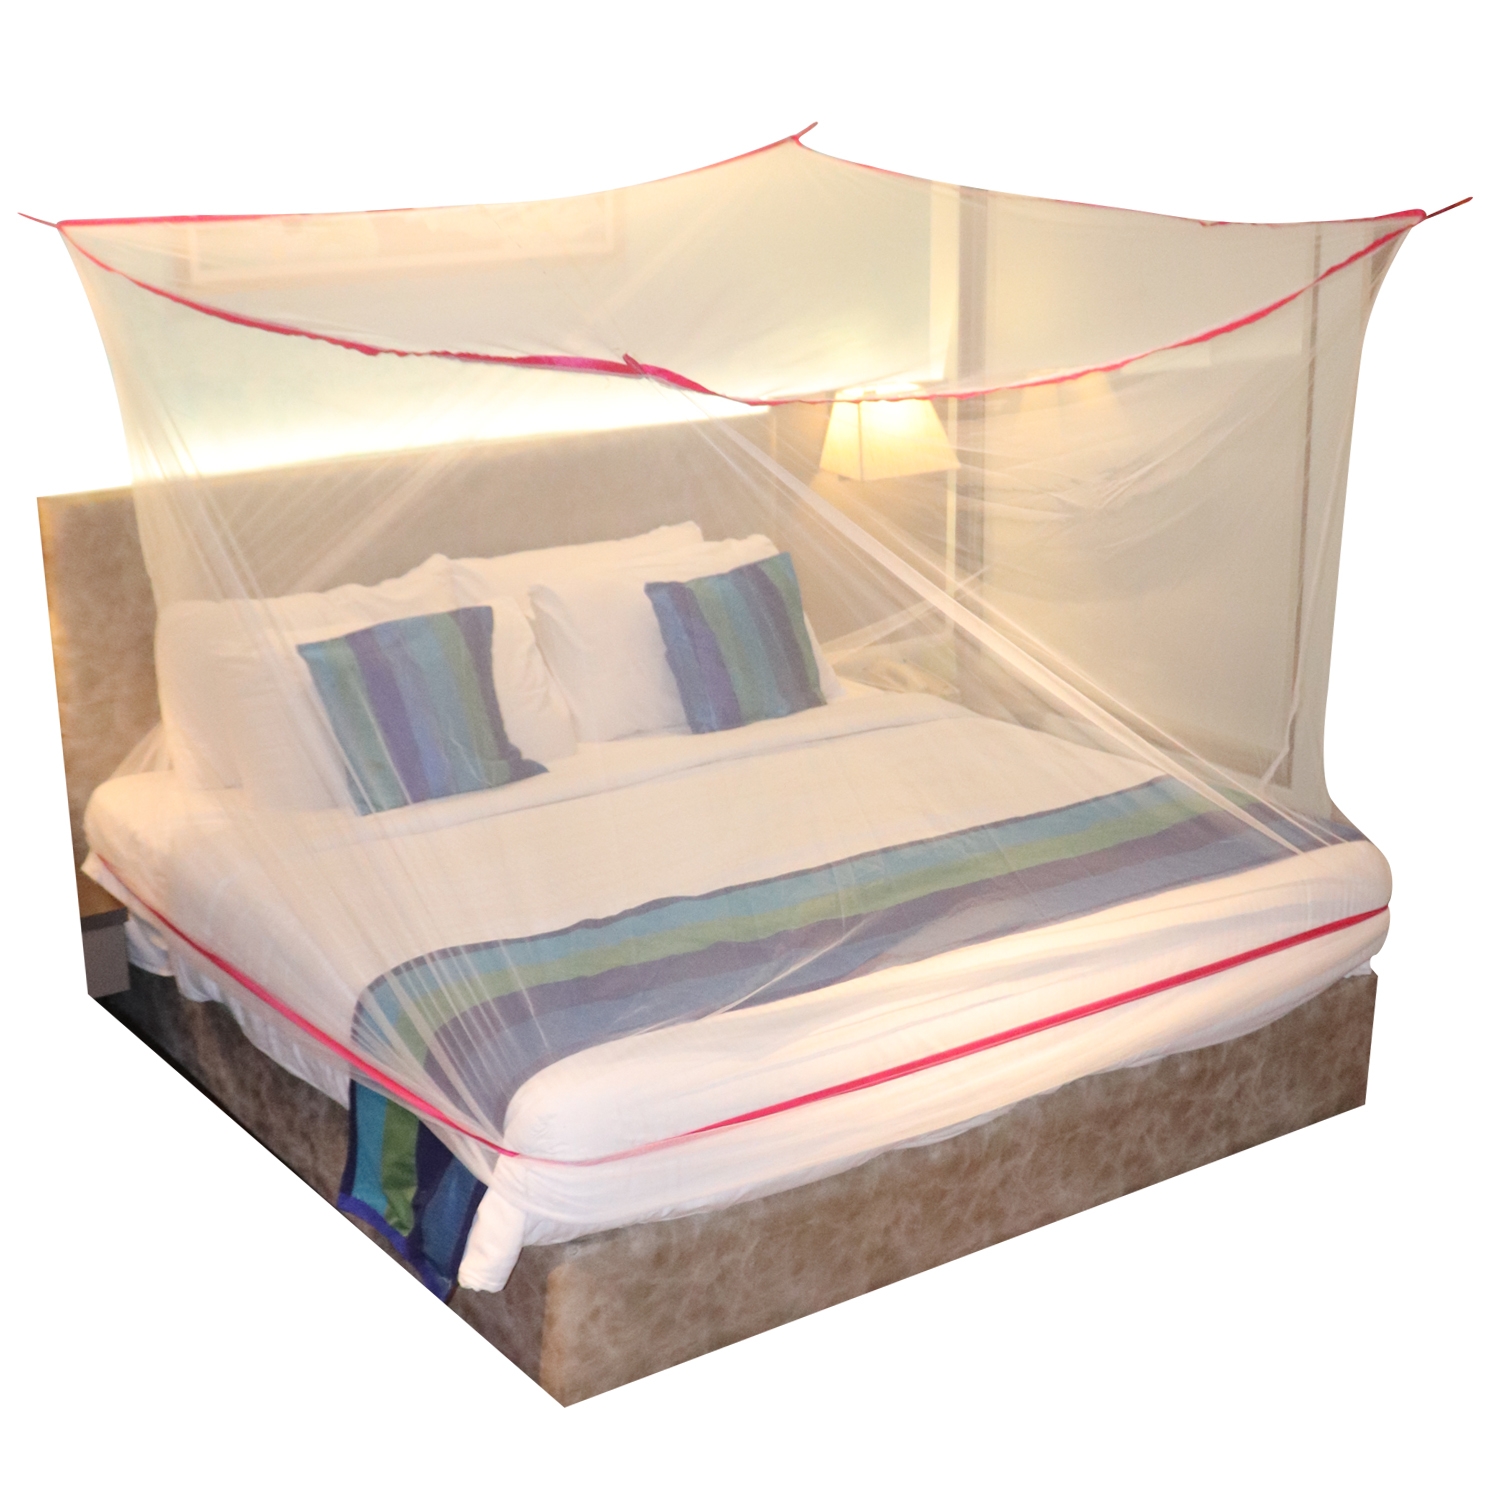 SILVER SHINE | Mosquito Net for Double Bed, King-Size, Square Hanging Foldable Polyester Net White And Pink 2